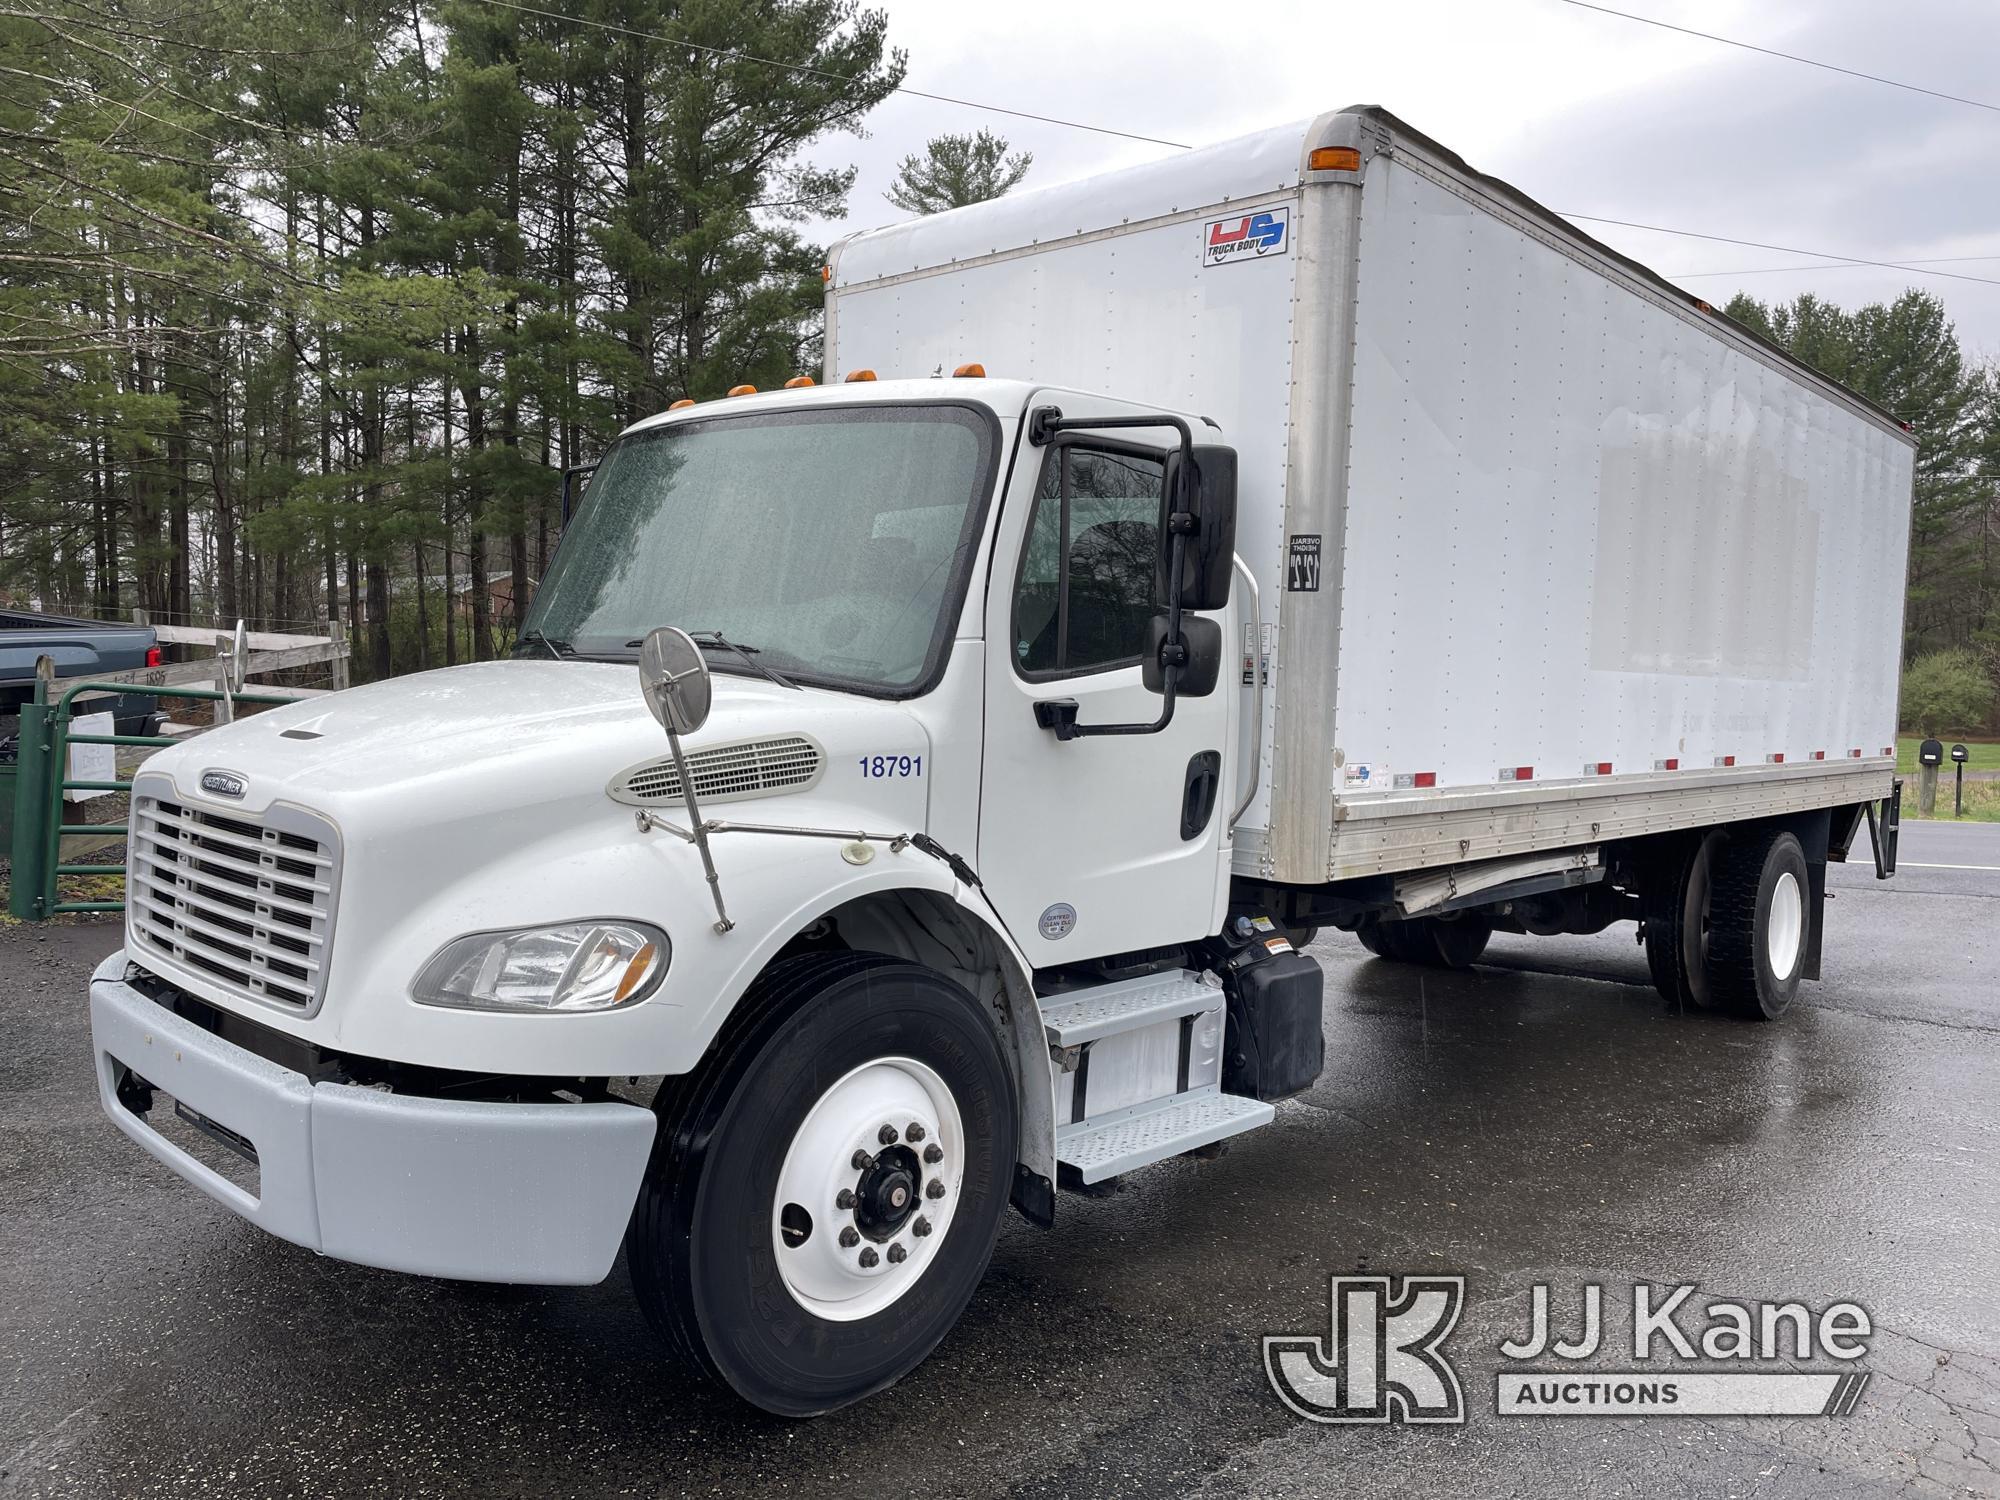 (Mount Airy, NC) 2013 Freightliner M2 106 Van Body Truck Runs & Moves) (Check Engine Light on